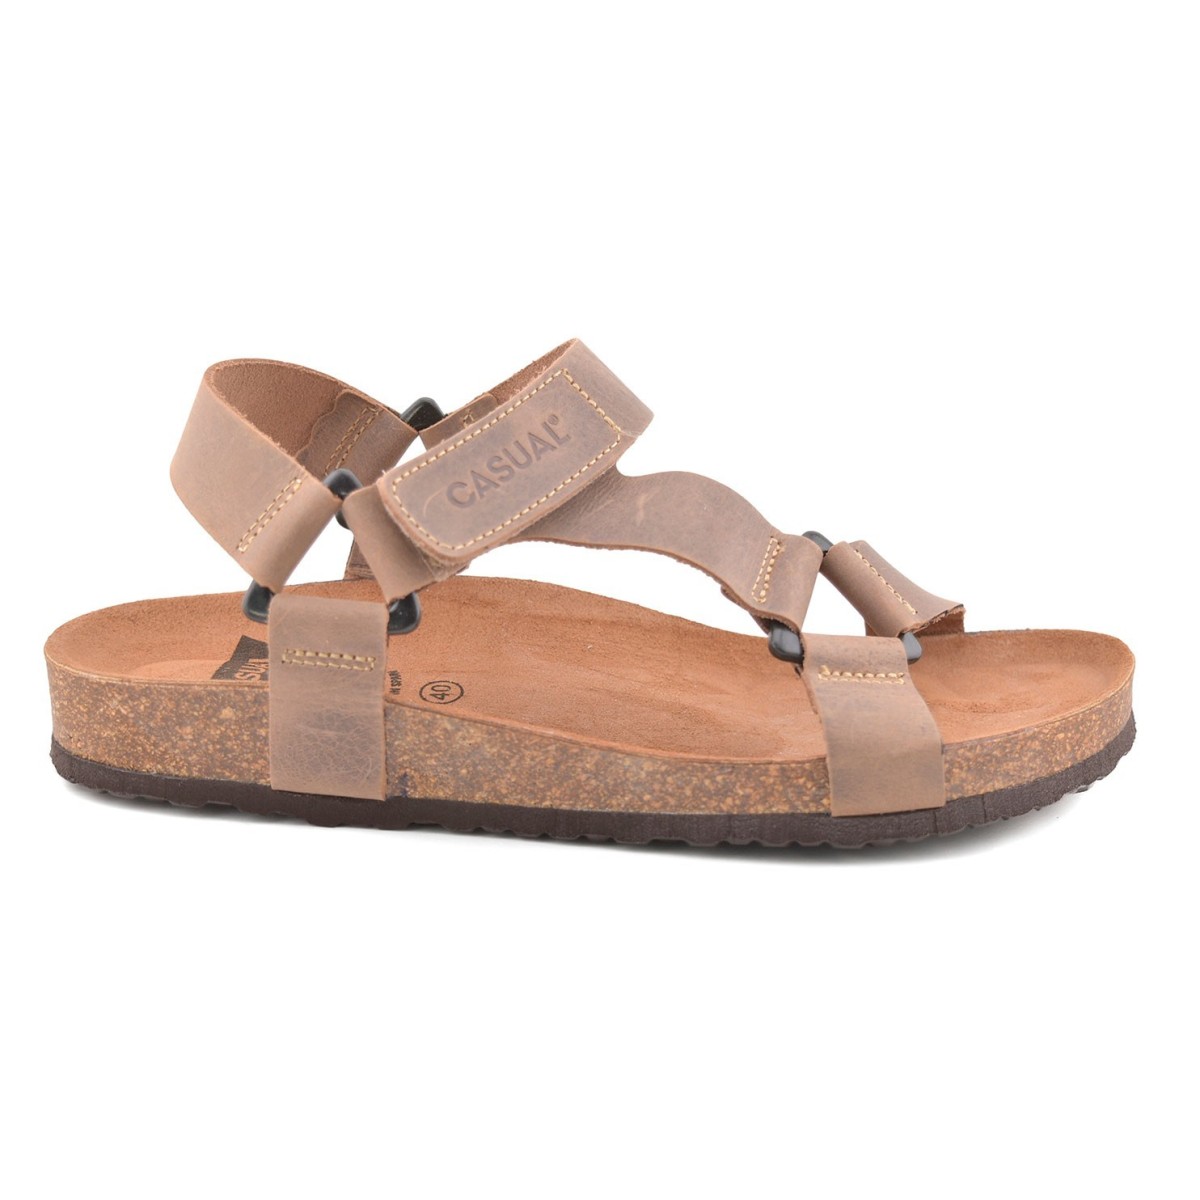 Bio men's beige leather sandals by Casual